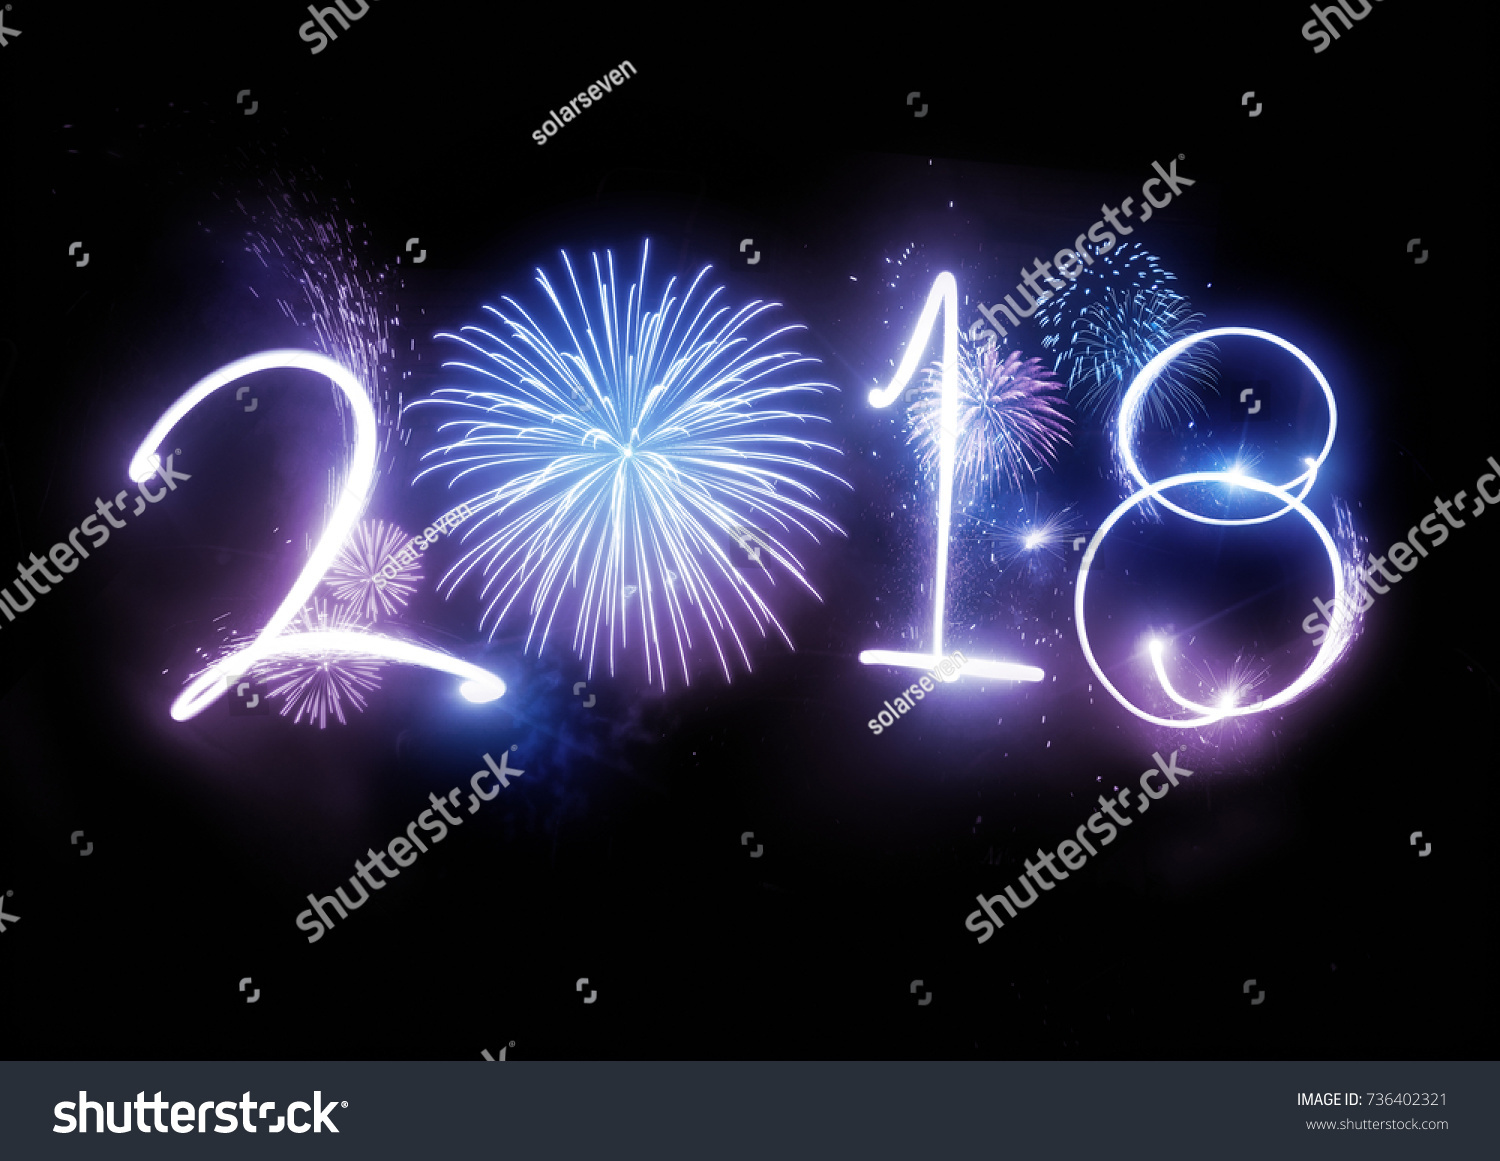 The year 2018 displayed with fireworks and strobes. New year and holidays concept. #736402321